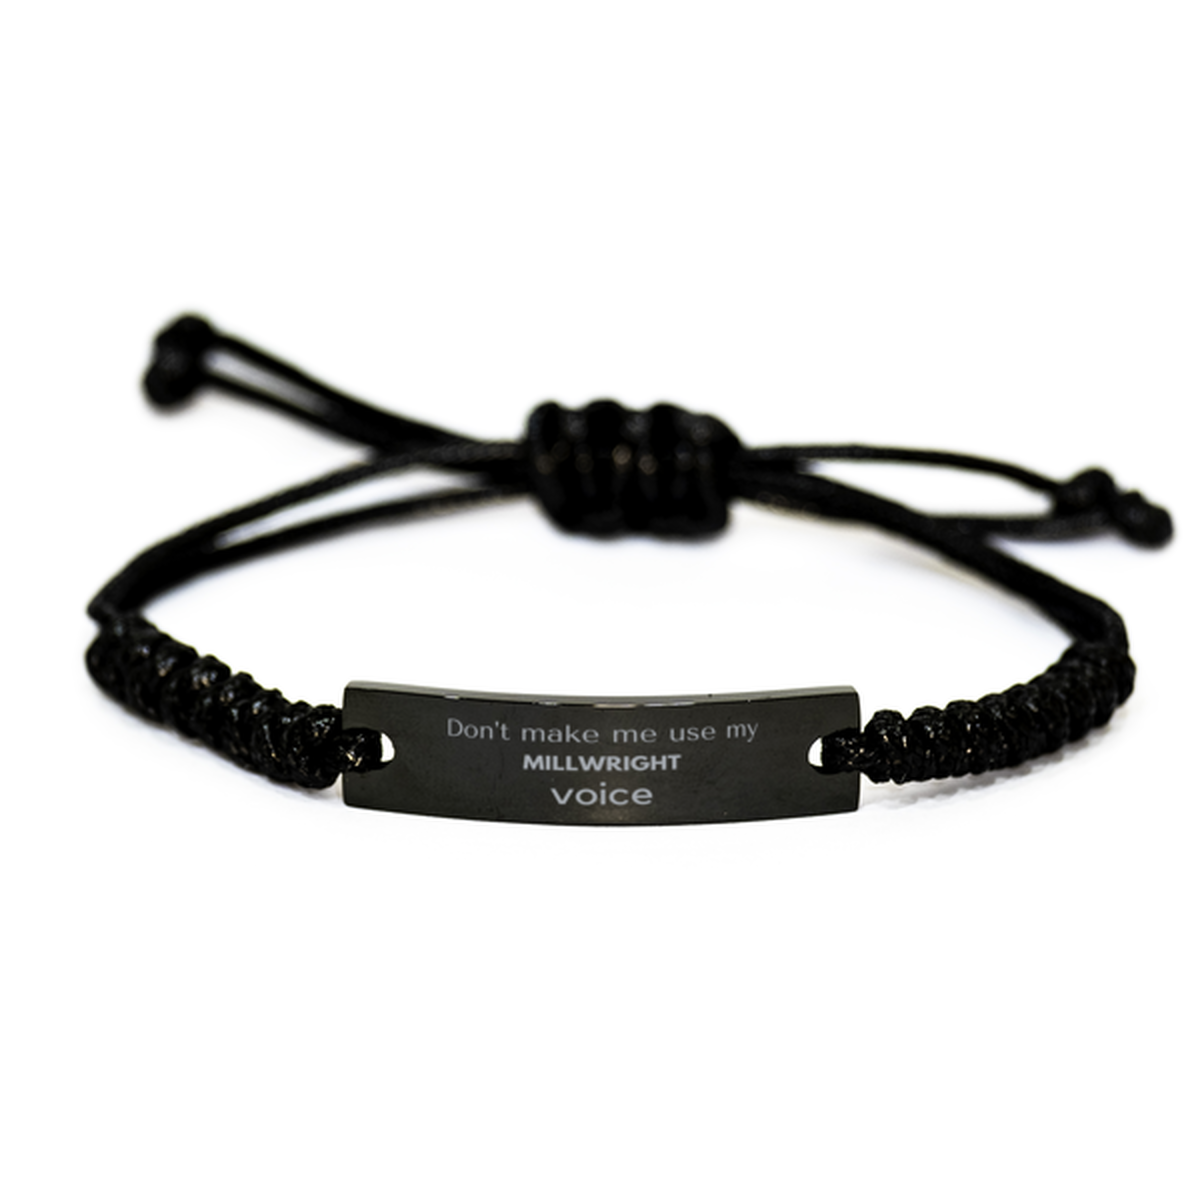 Don't make me use my Millwright voice, Sarcasm Millwright Gifts, Christmas Millwright Black Rope Bracelet Birthday Unique Gifts For Millwright Coworkers, Men, Women, Colleague, Friends